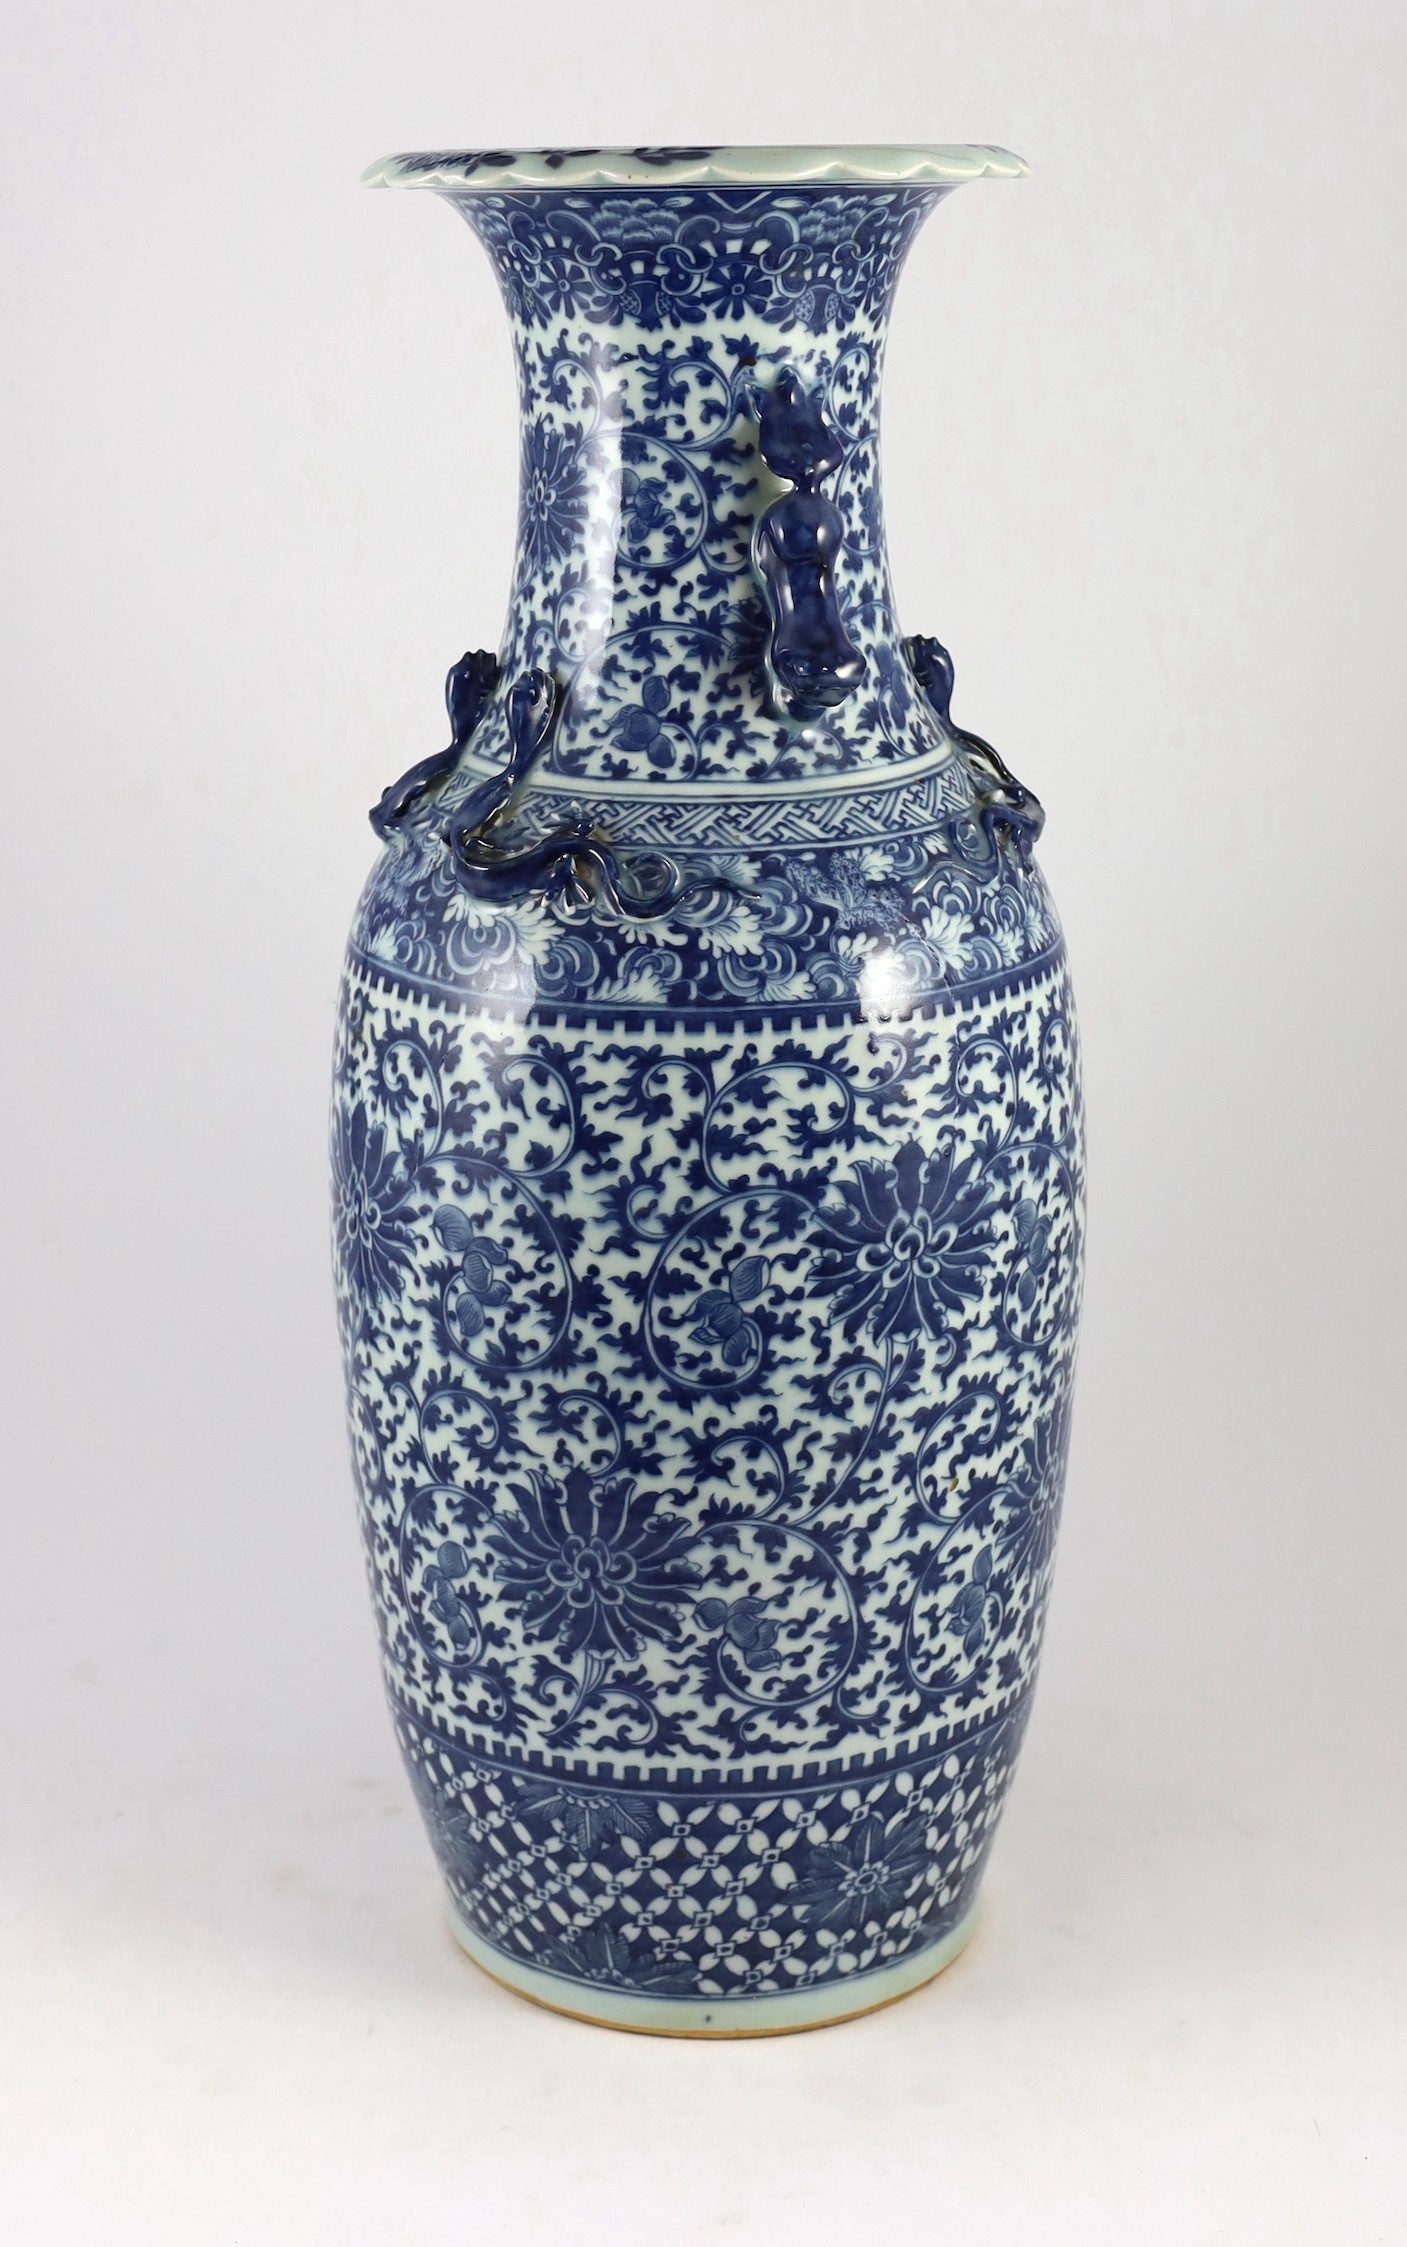 A large Chinese blue and white ‘lotus’ vase, 19th century, 59cm high, damaged